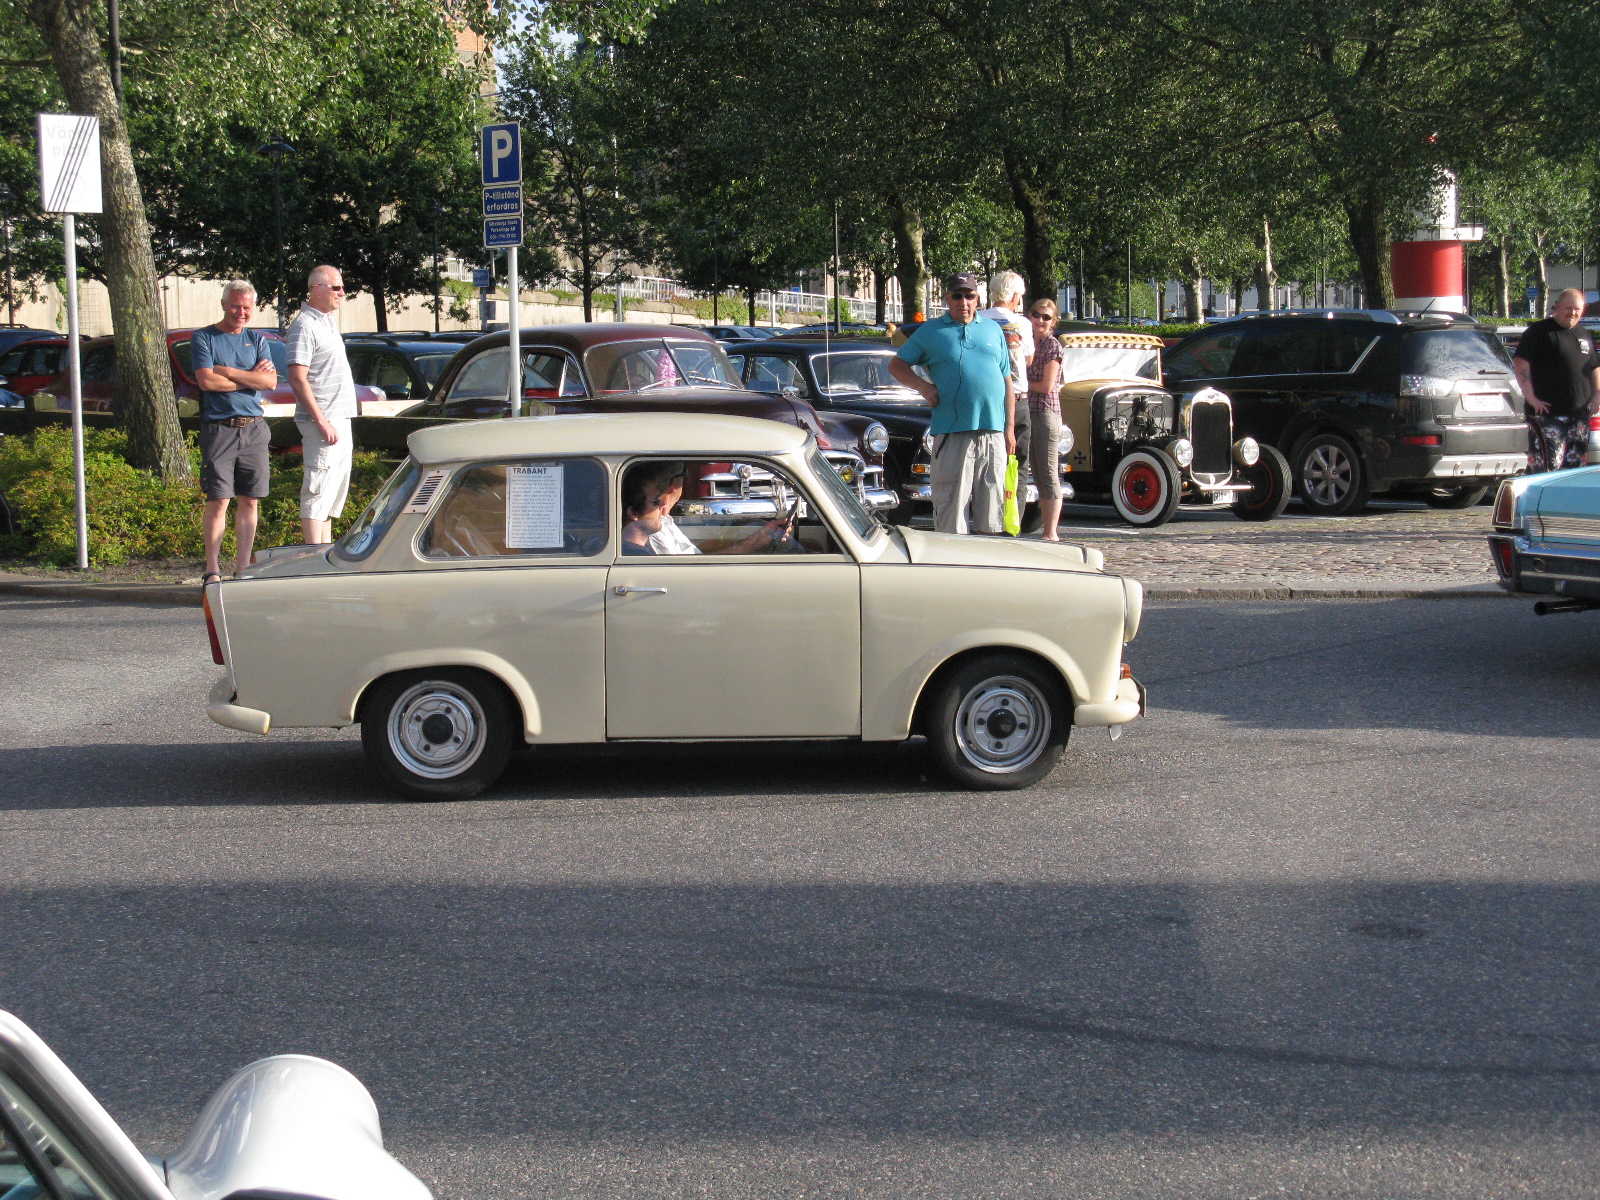 an old car in the middle of a street with people walking